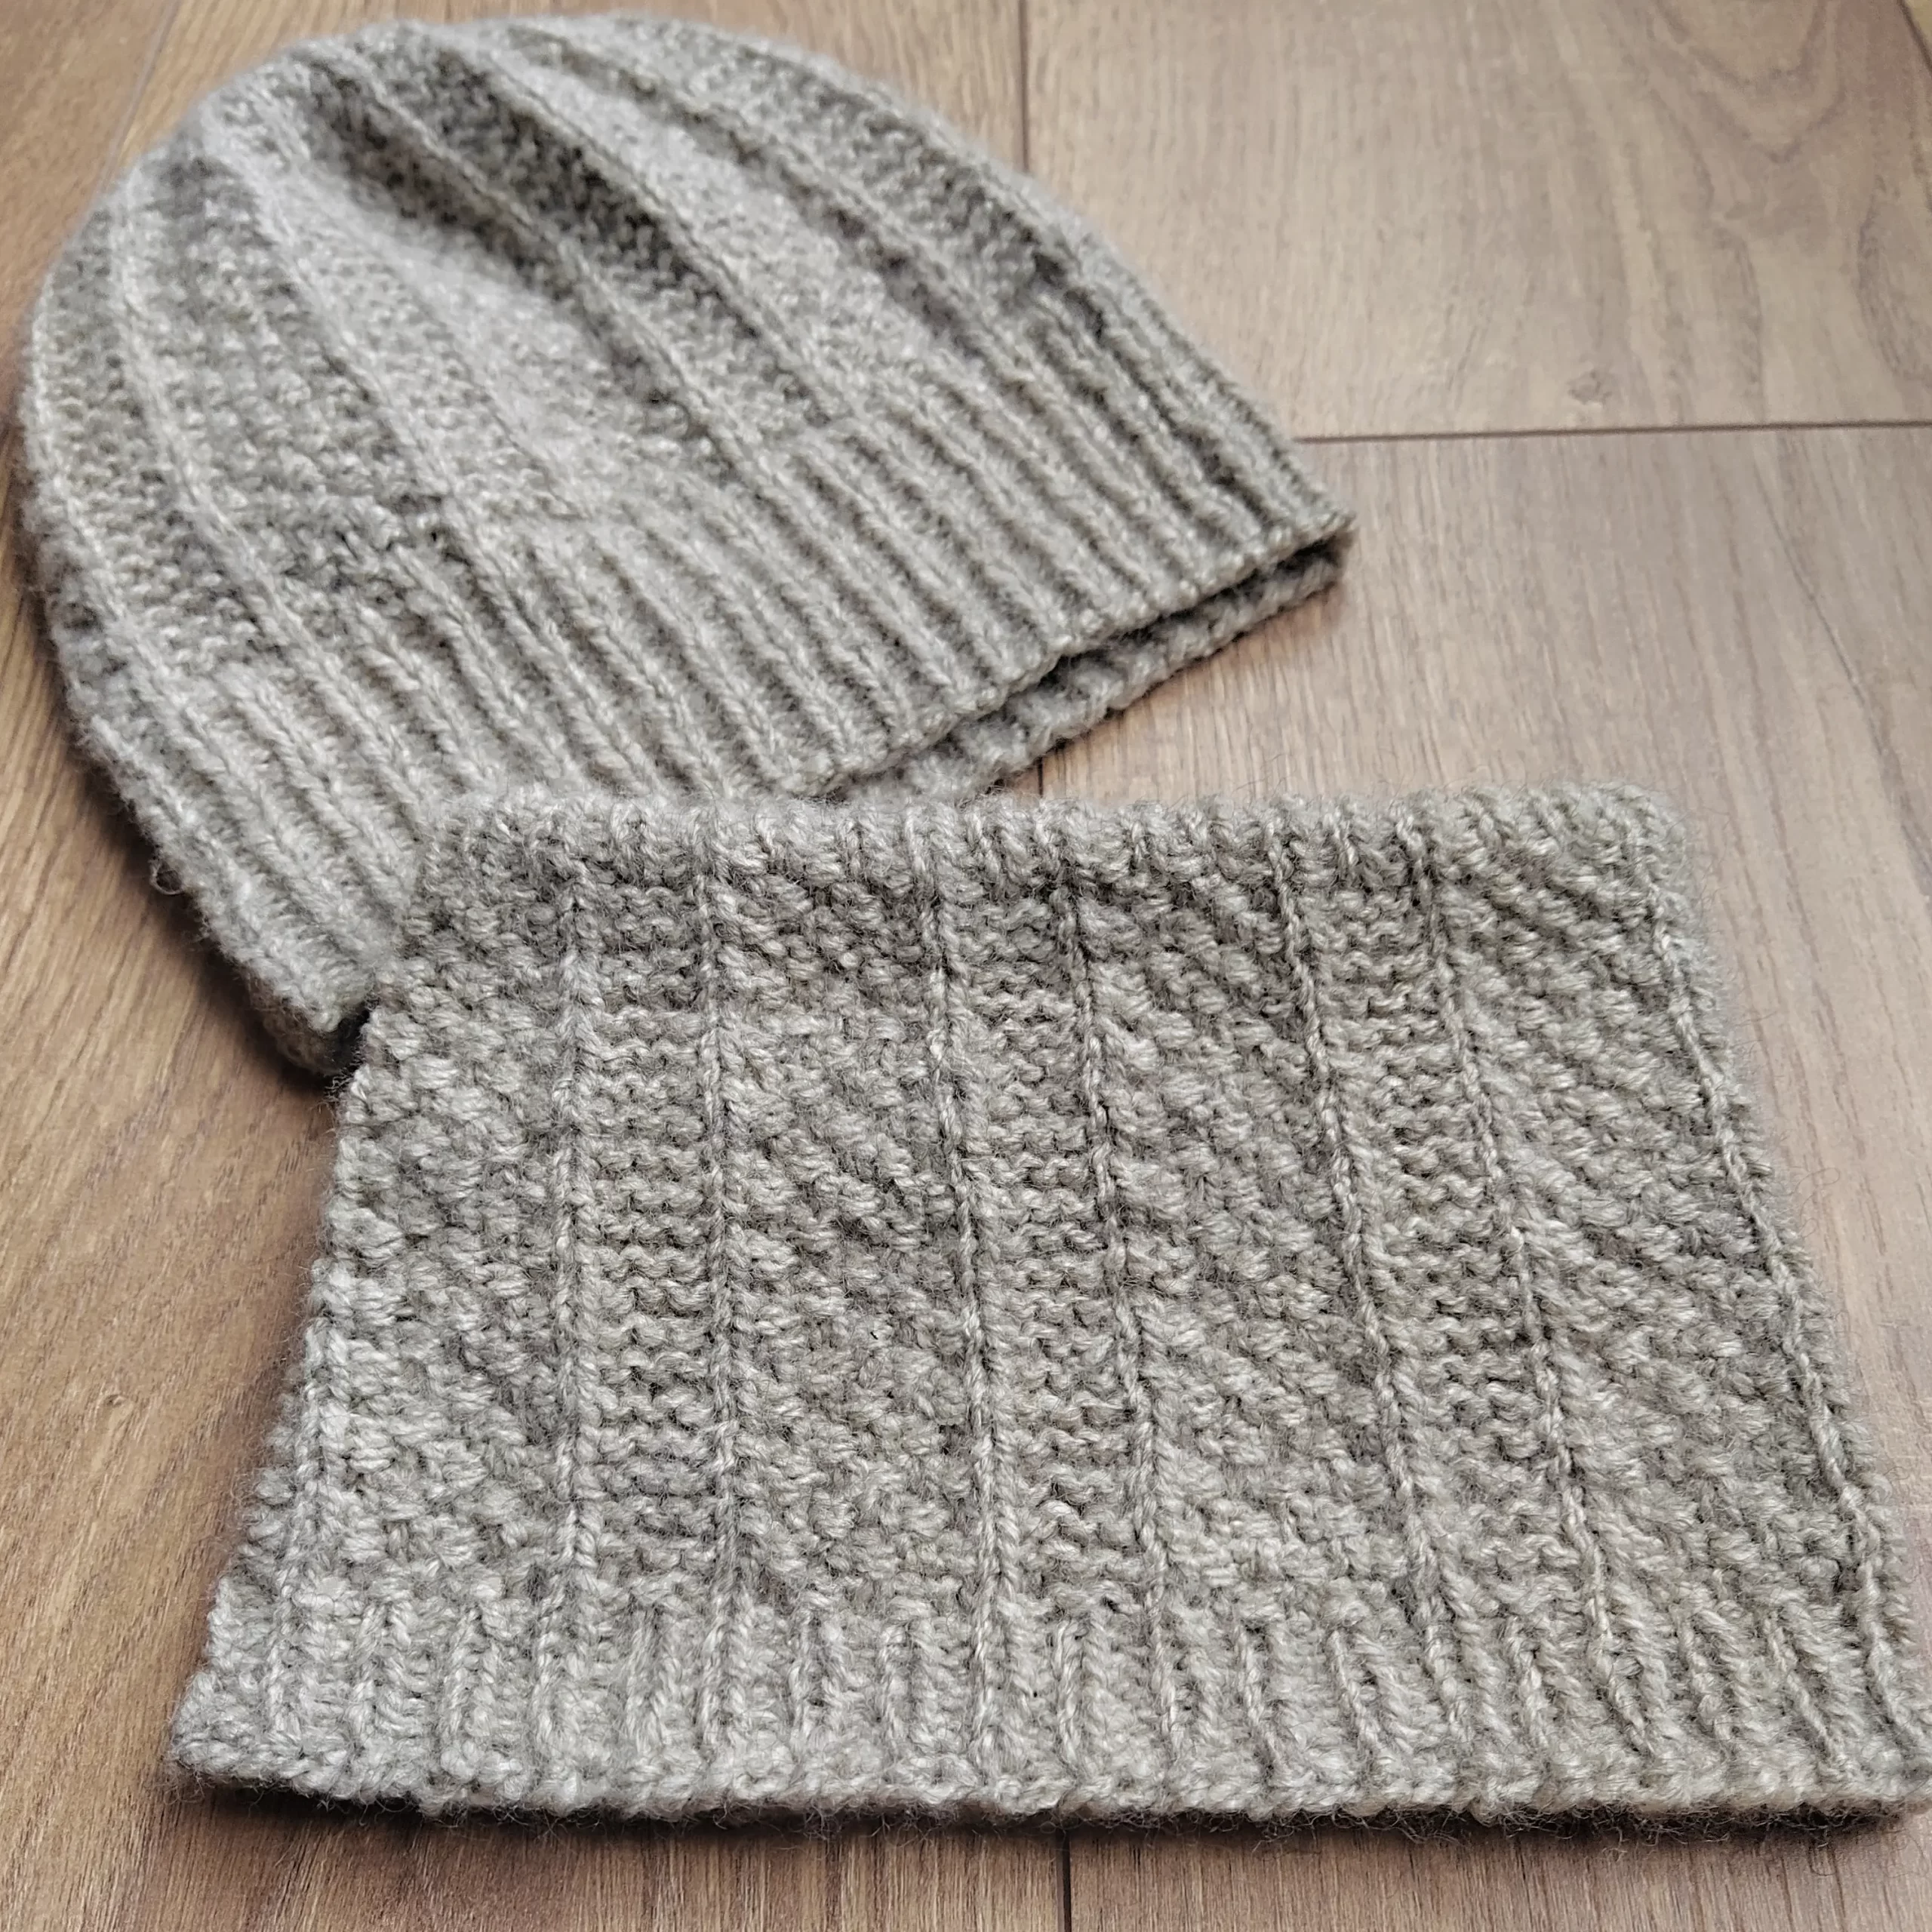 An angled view of the Cambronne cowl and beanie texture